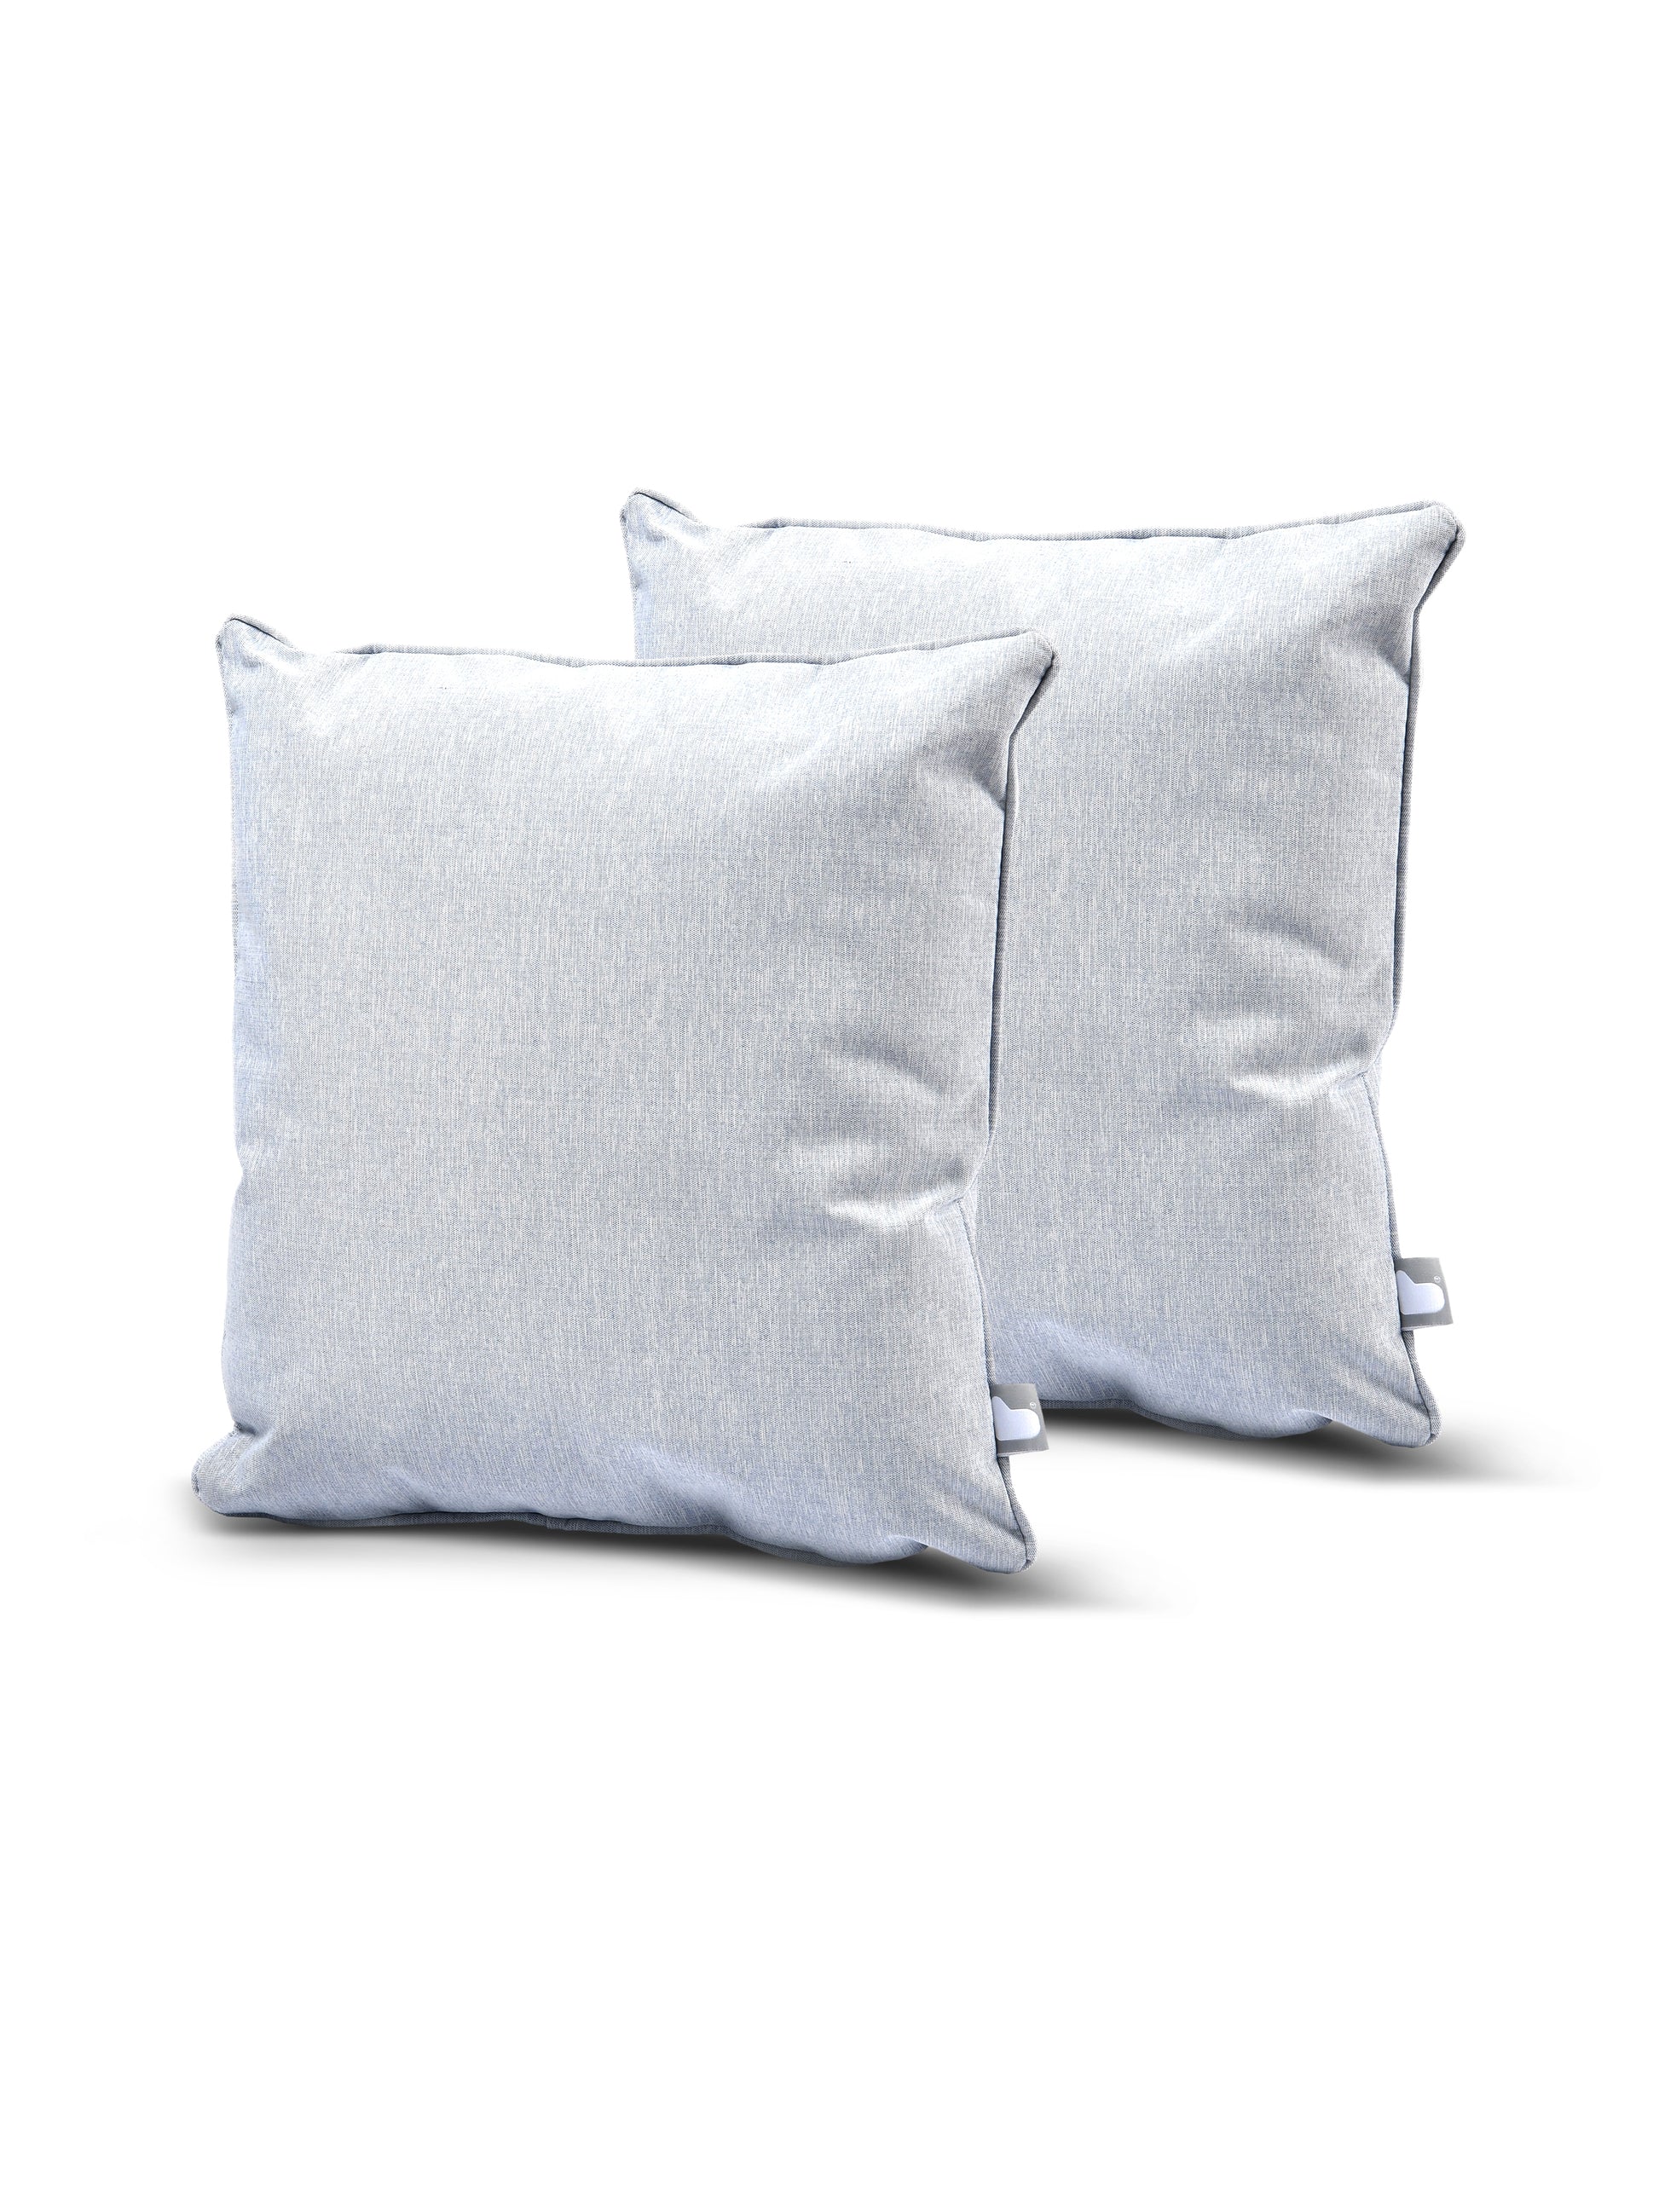 Two square, light gray B Cushion Twin Pack Pastel Collection by Brisks with a smooth texture stand upright against a white background. The pillows appear plush and are identically designed with UV-resistant material, perfect for home decor or comfort.